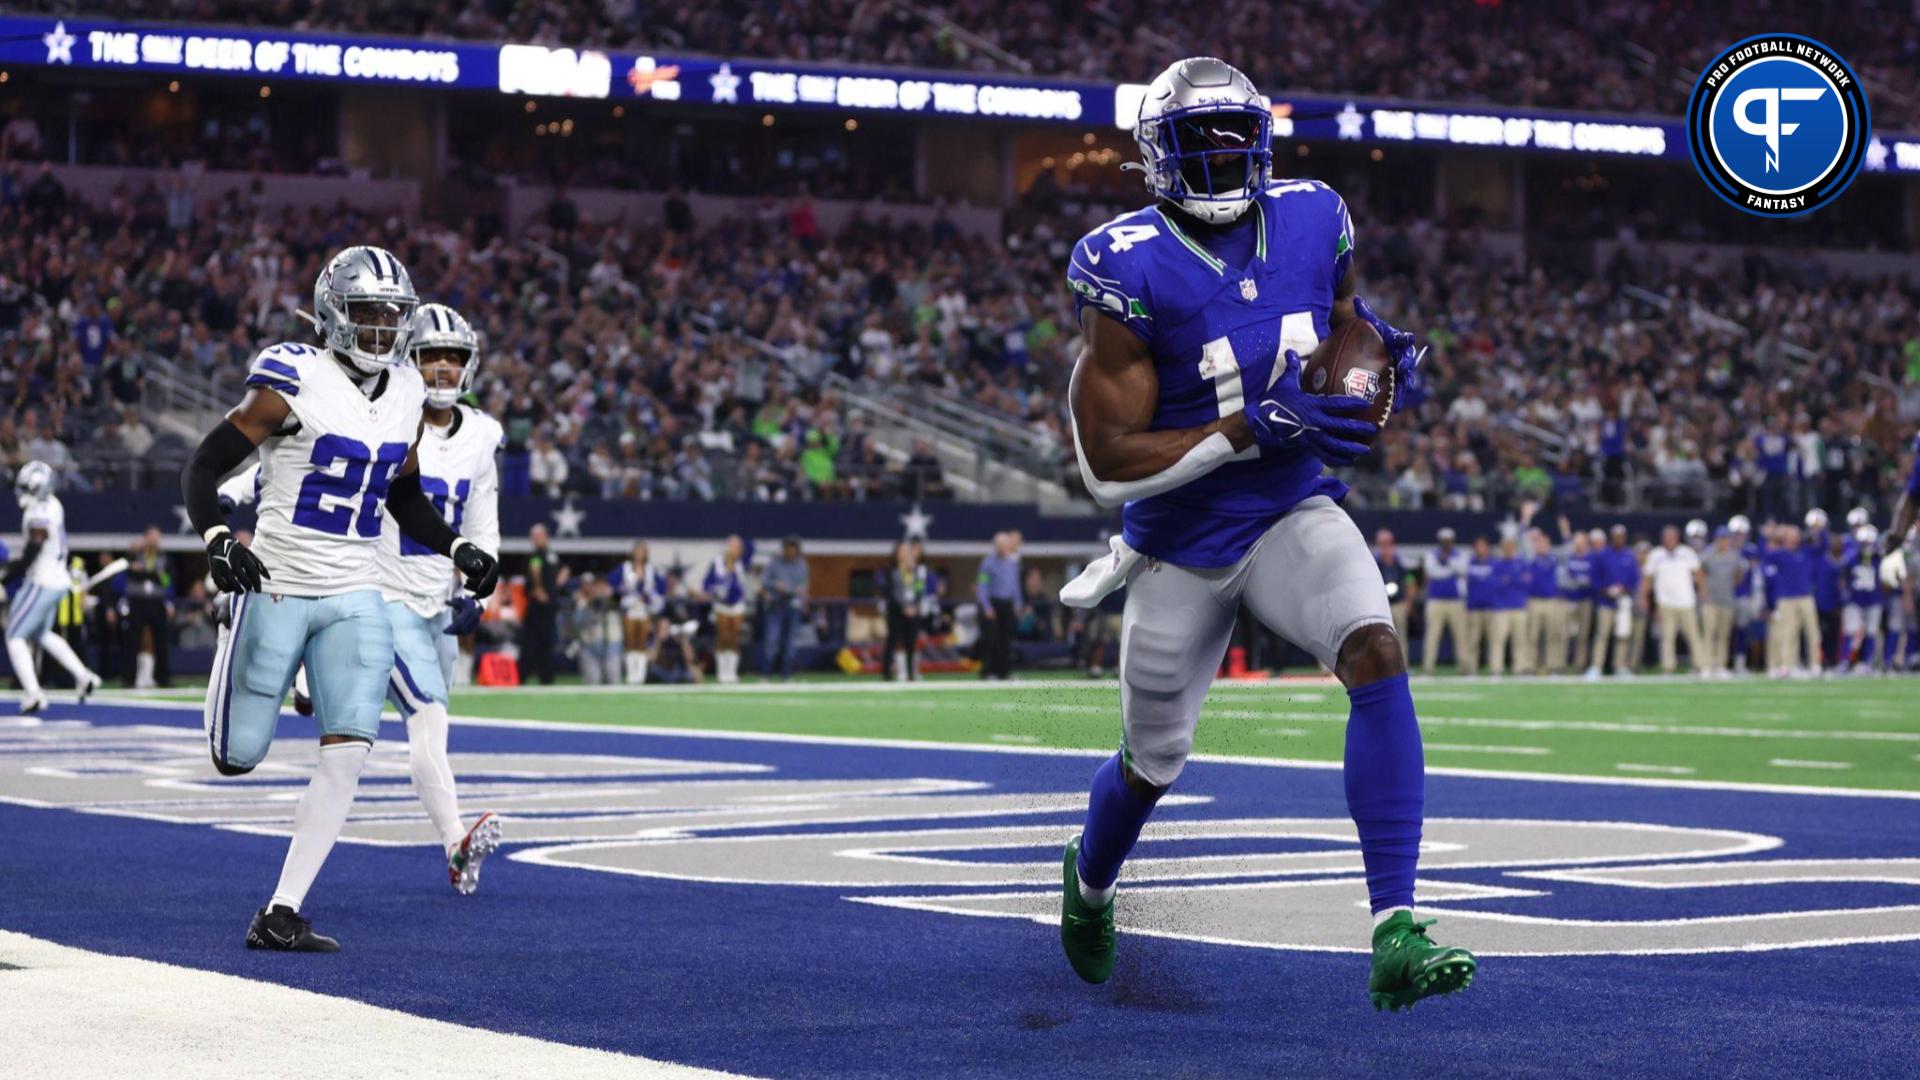 Seattle Seahawks WR DK Metcalf (14) catches a touchdown pass against the Dallas Cowboys.